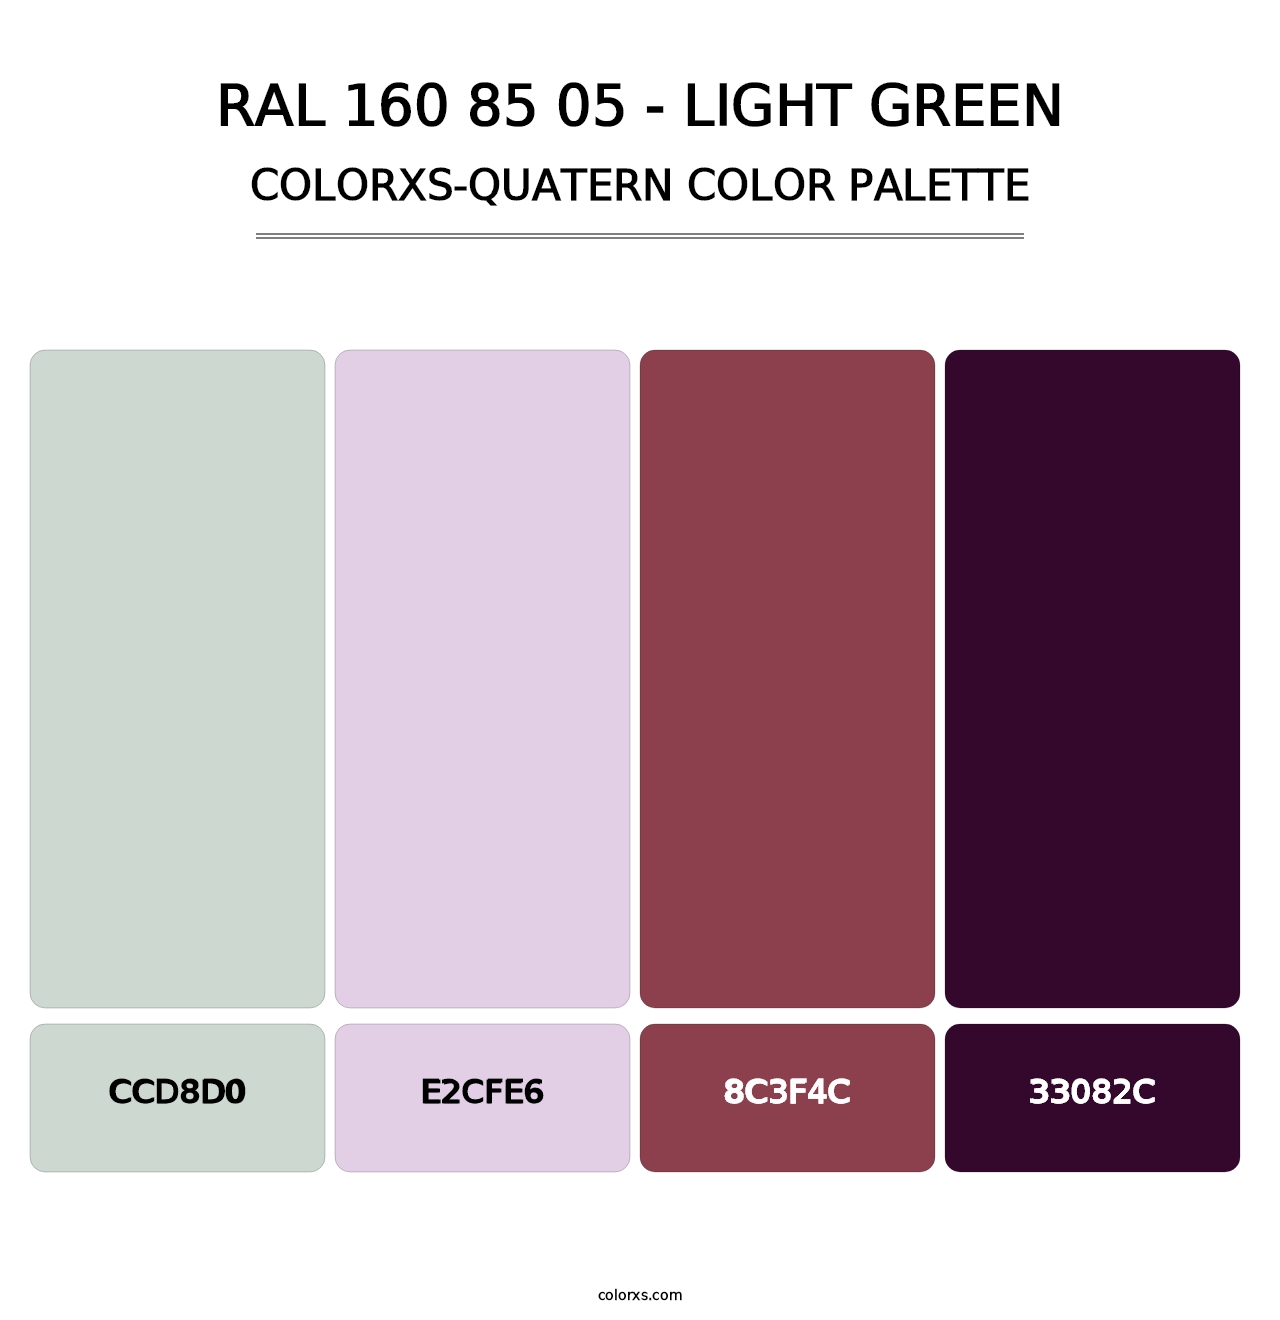 RAL 160 85 05 - Light Green - Colorxs Quatern Palette